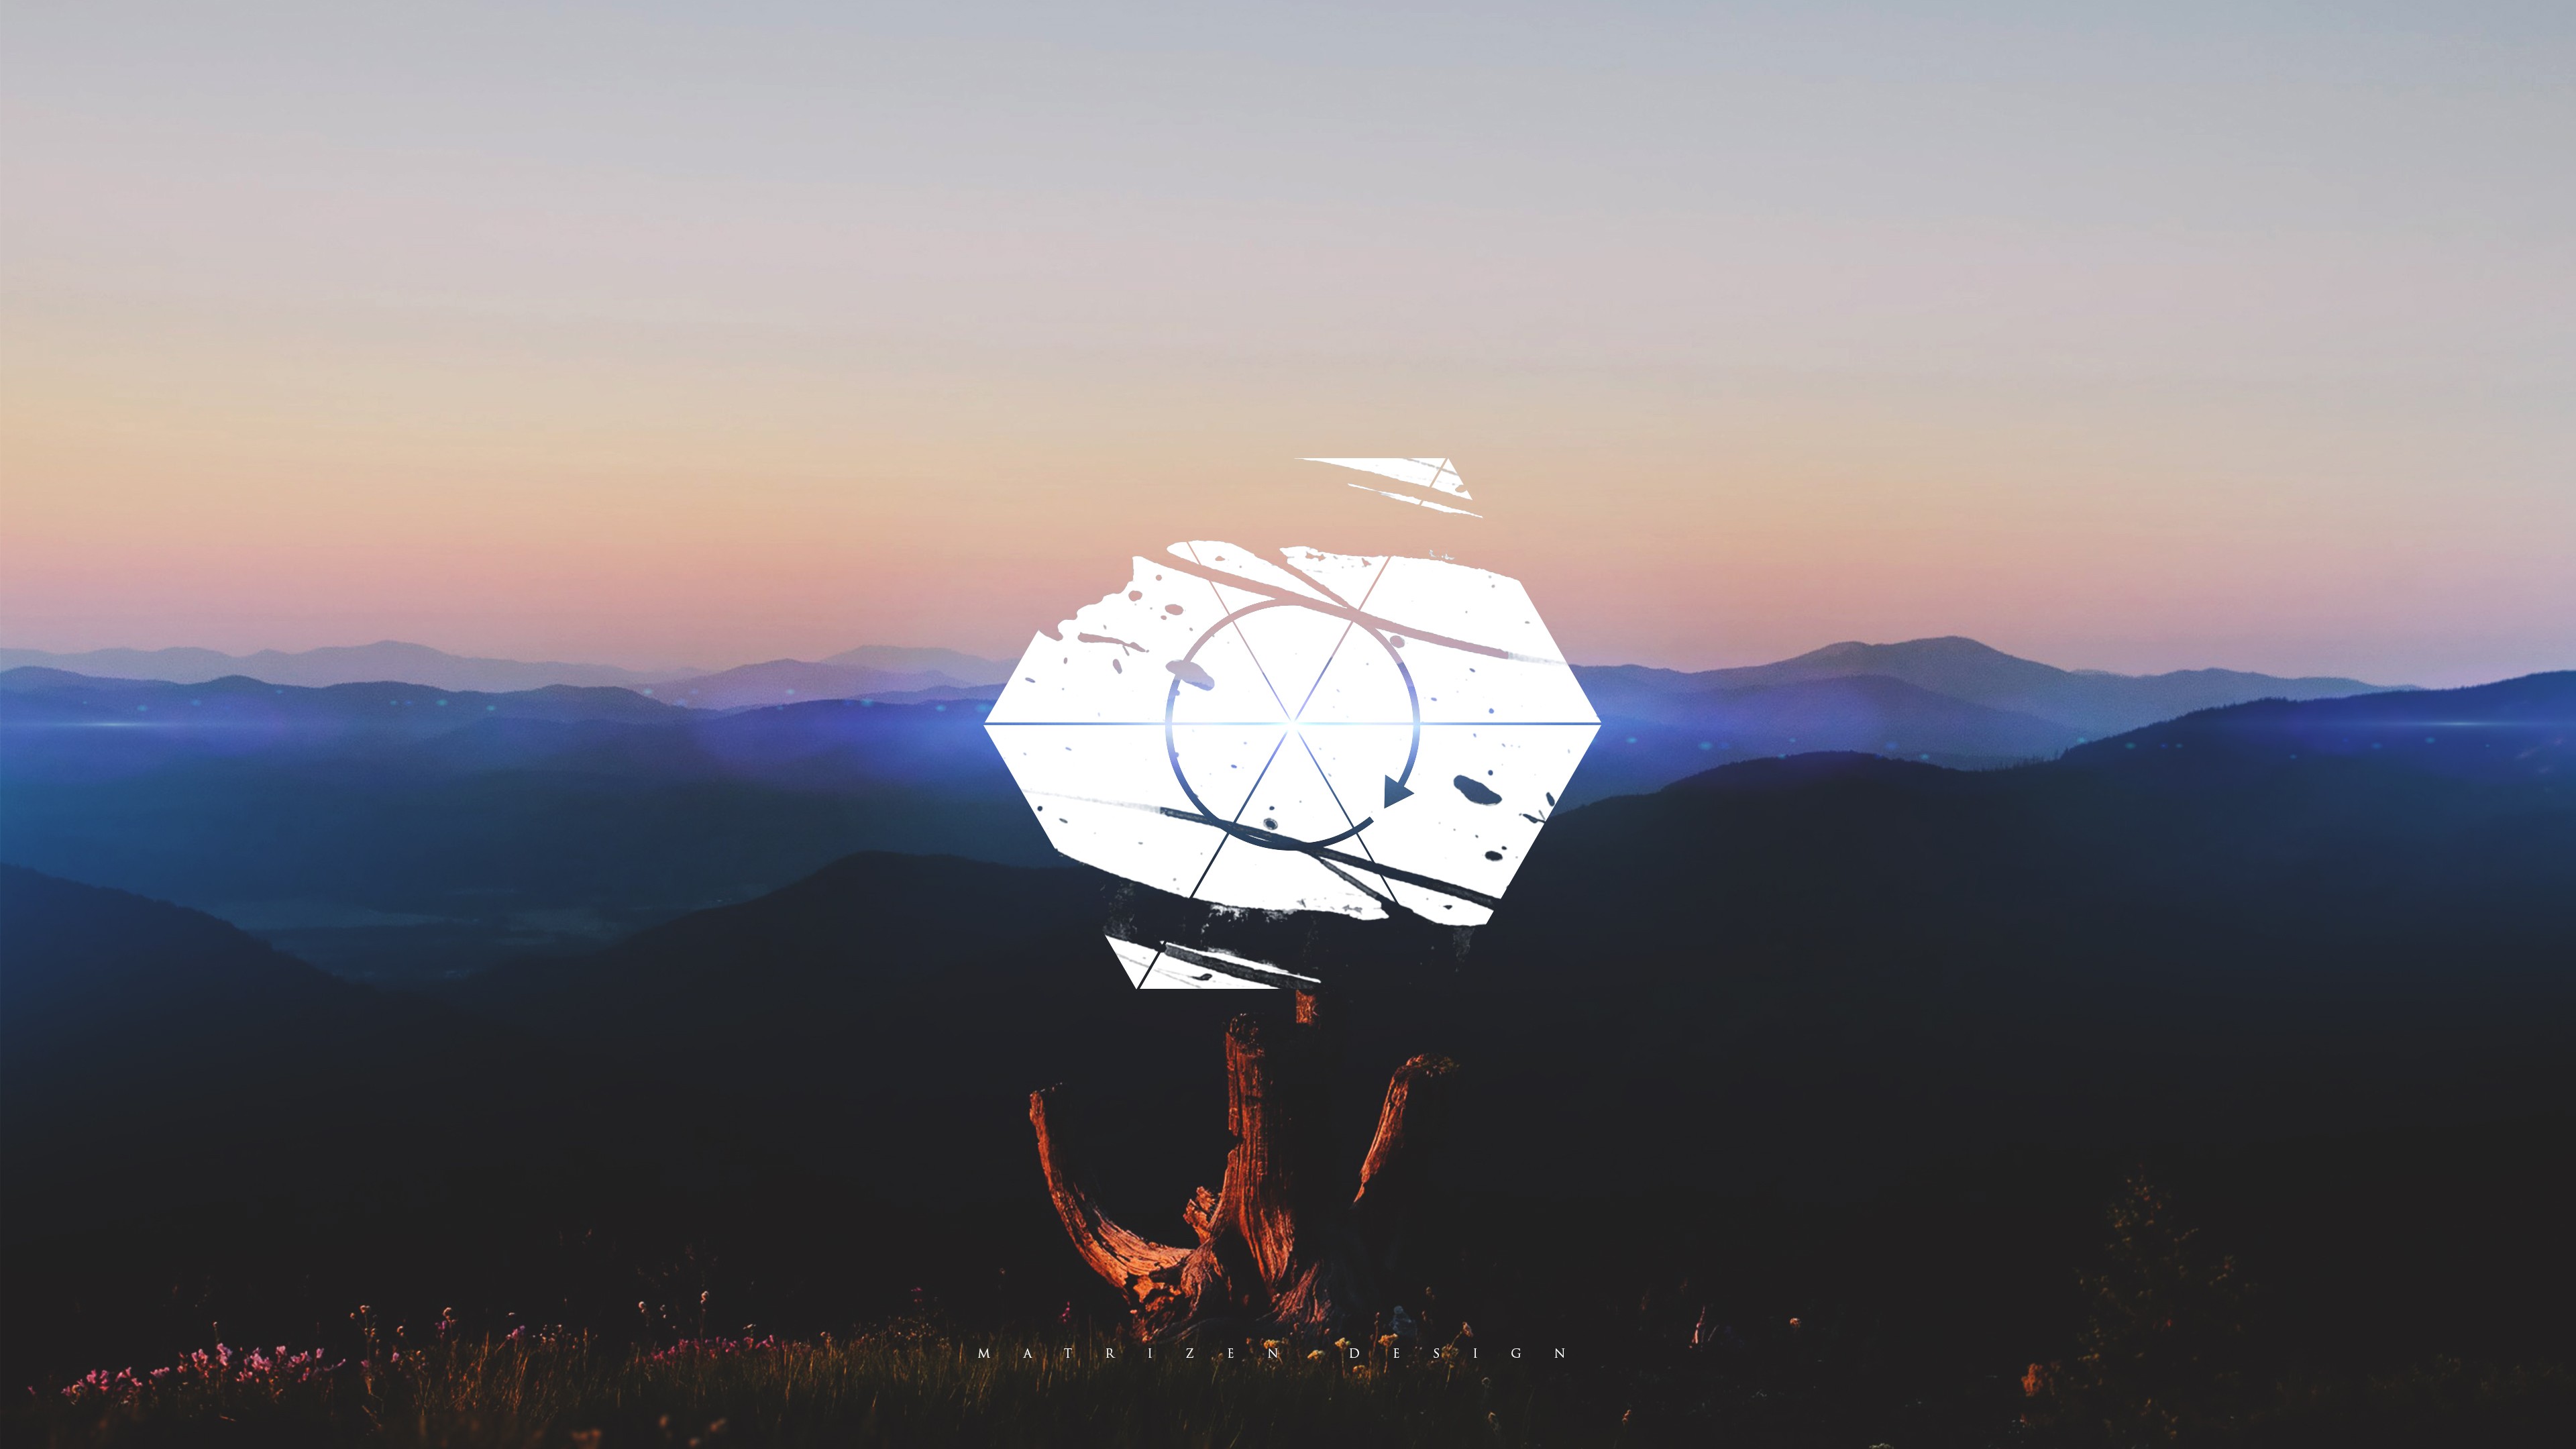 landscape, Mountains, Hills, Sky, Wood, Digital art, 2D, Triangle, Wheels, Shapes, Photography, Minimalism, Low poly, Flares, Photoshop Wallpaper